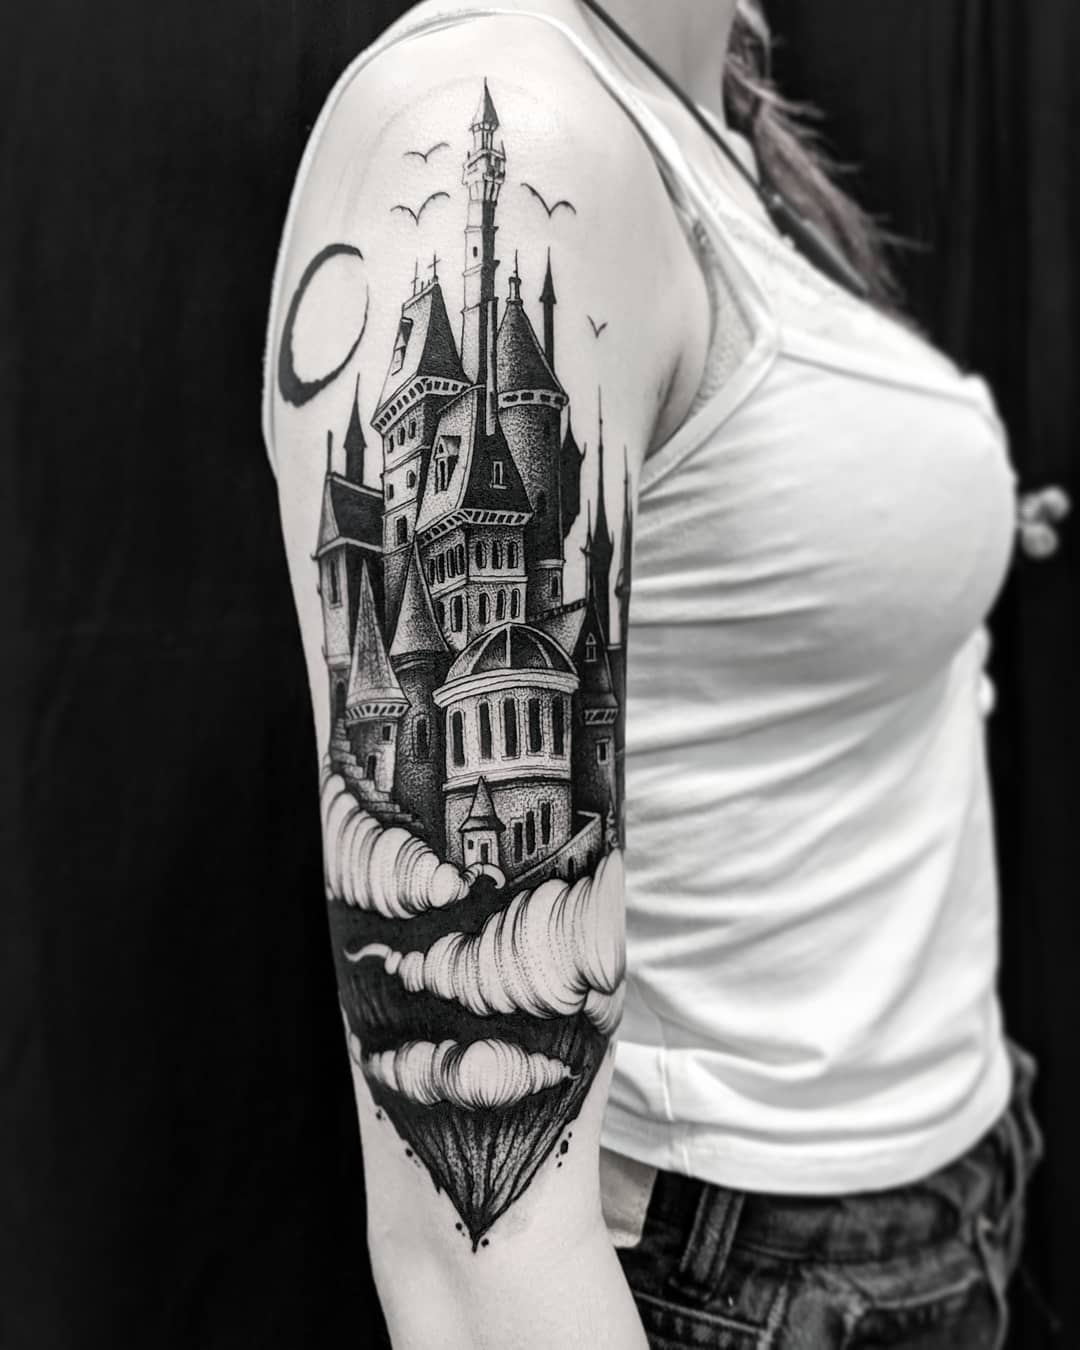 Frankenstein and Draculas castle Tattoo by Mike Nasser at Harbourside  tattoo in Vancouver BC  Frankenstein tattoo Castle tattoo Graffiti  lettering